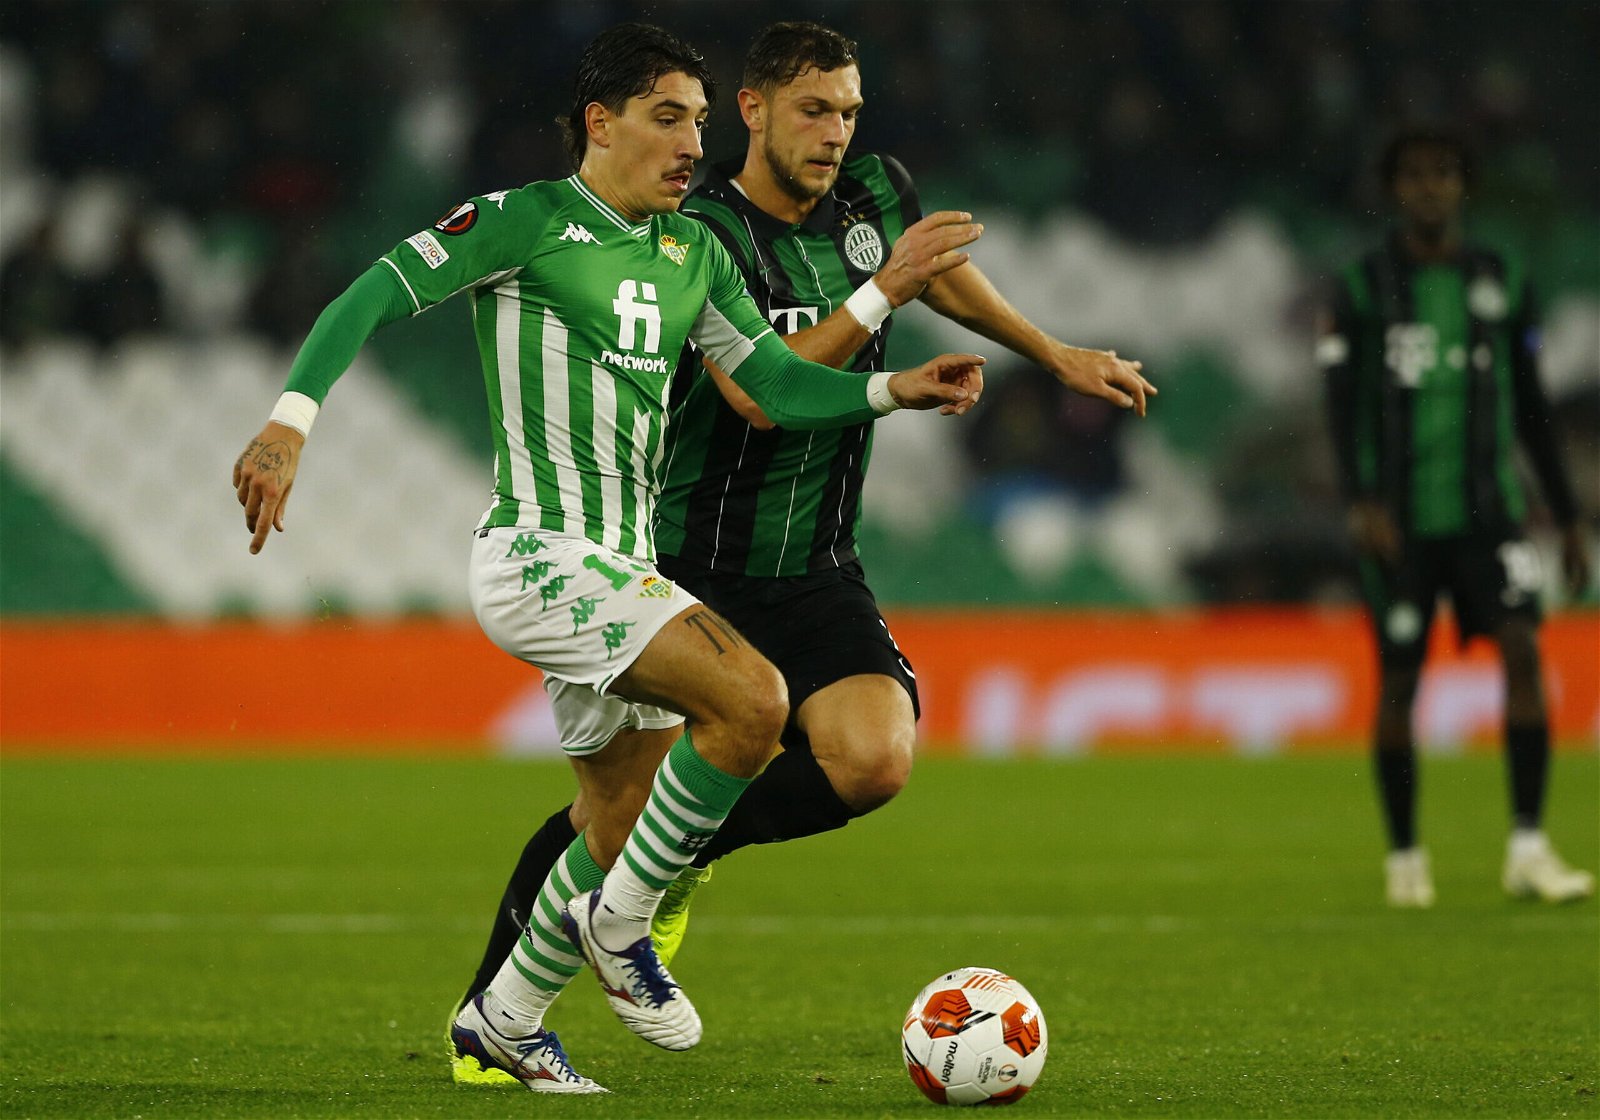 The lowdown on Real Betis